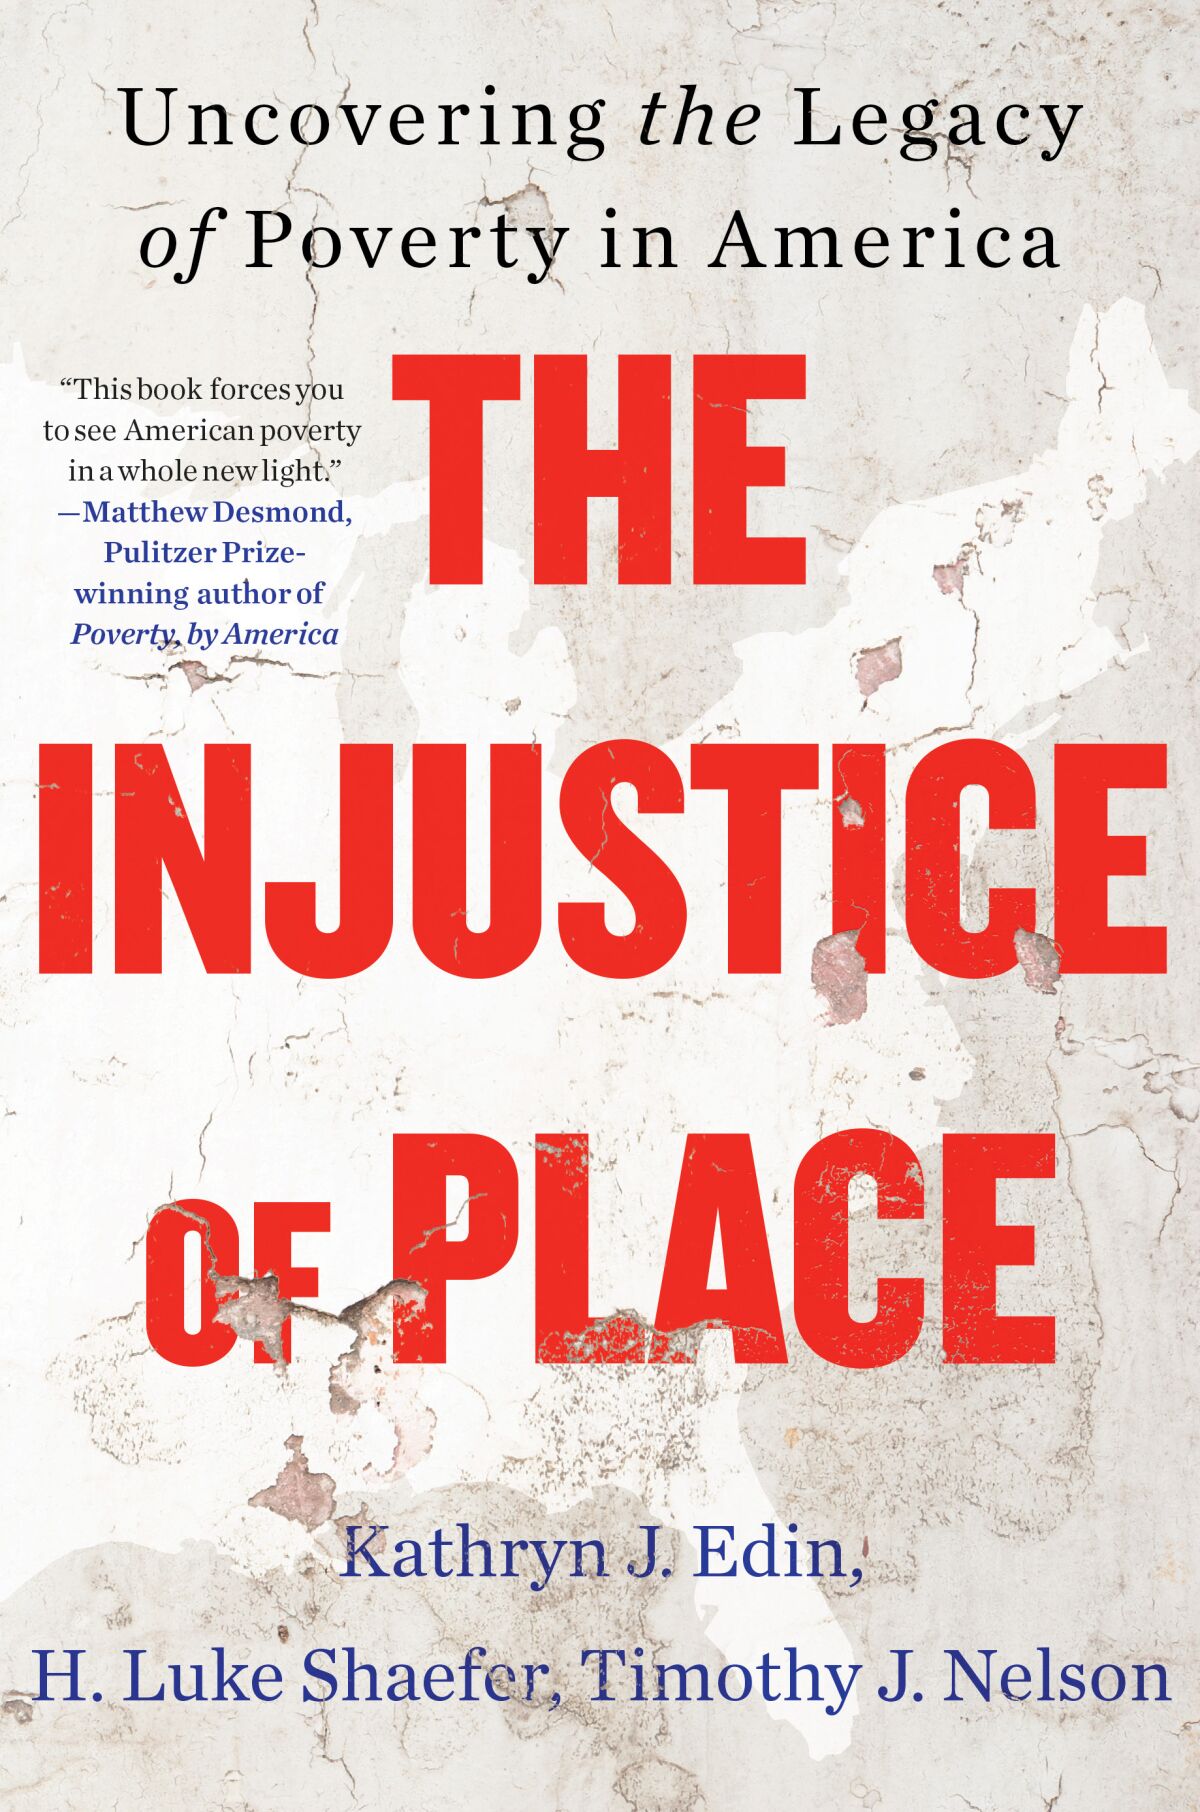 "The Injustice of Place, by Kathryn J. Edin, H. Luke Shaefer and Timothy J. Nelson